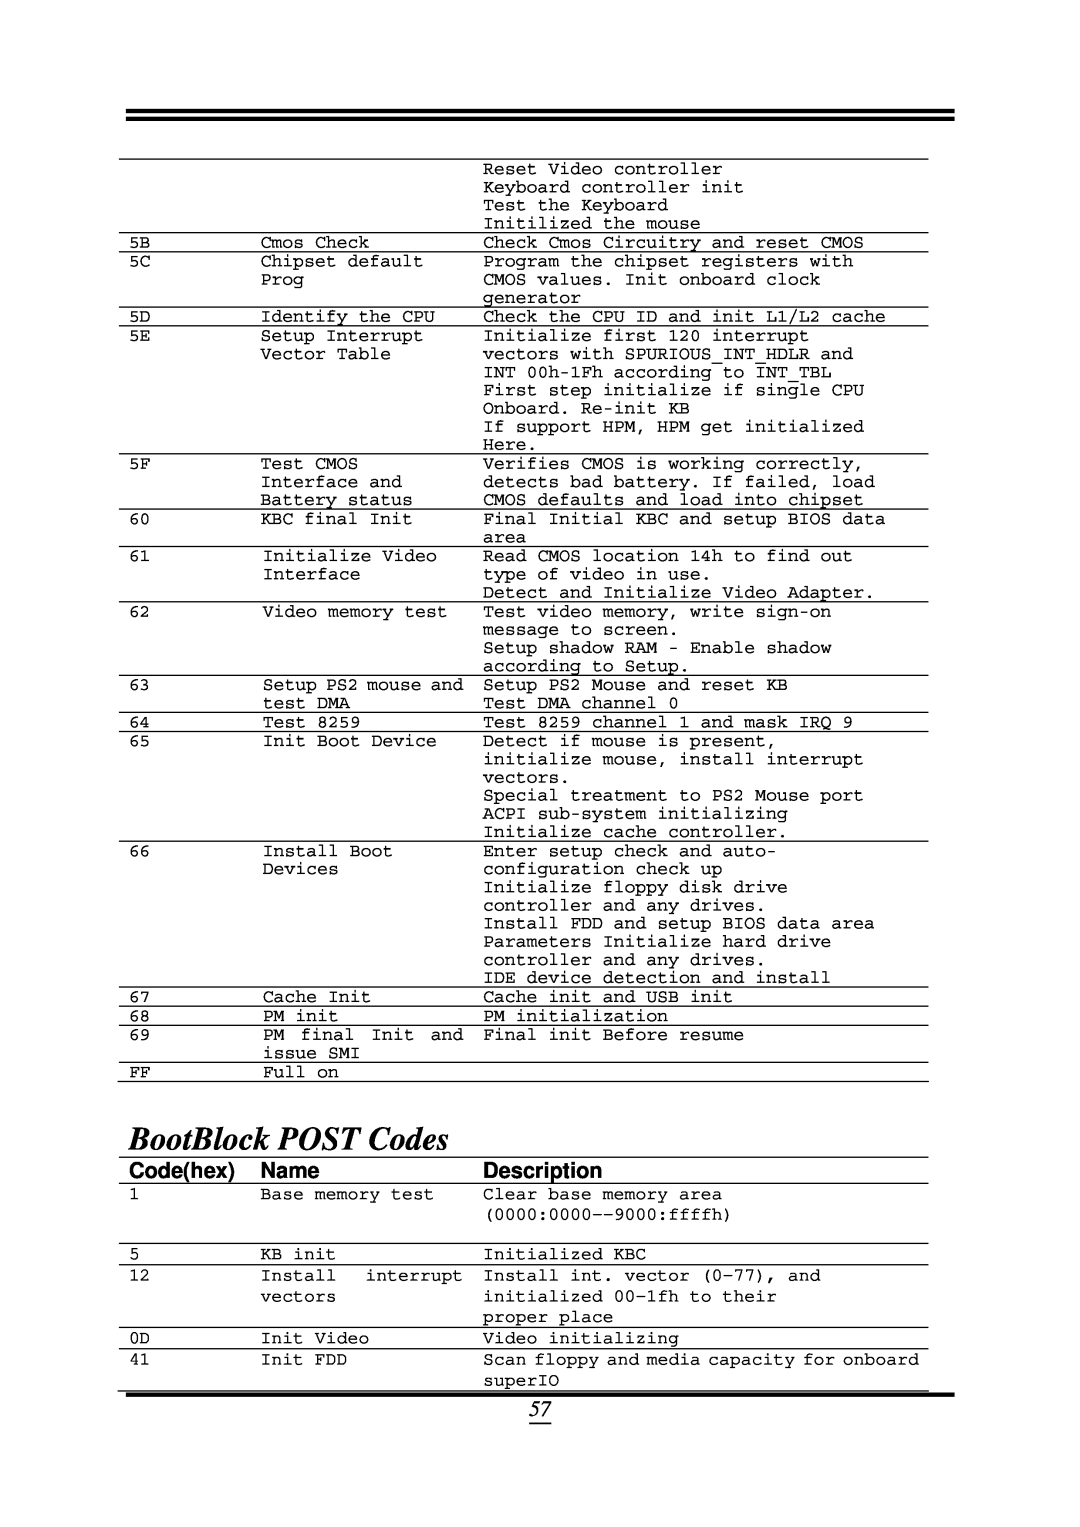 AMD 790GX, SB750 user manual BootBlock POST Codes, Codehex, Name, Description, Scan floppy and media capacity for onboard 